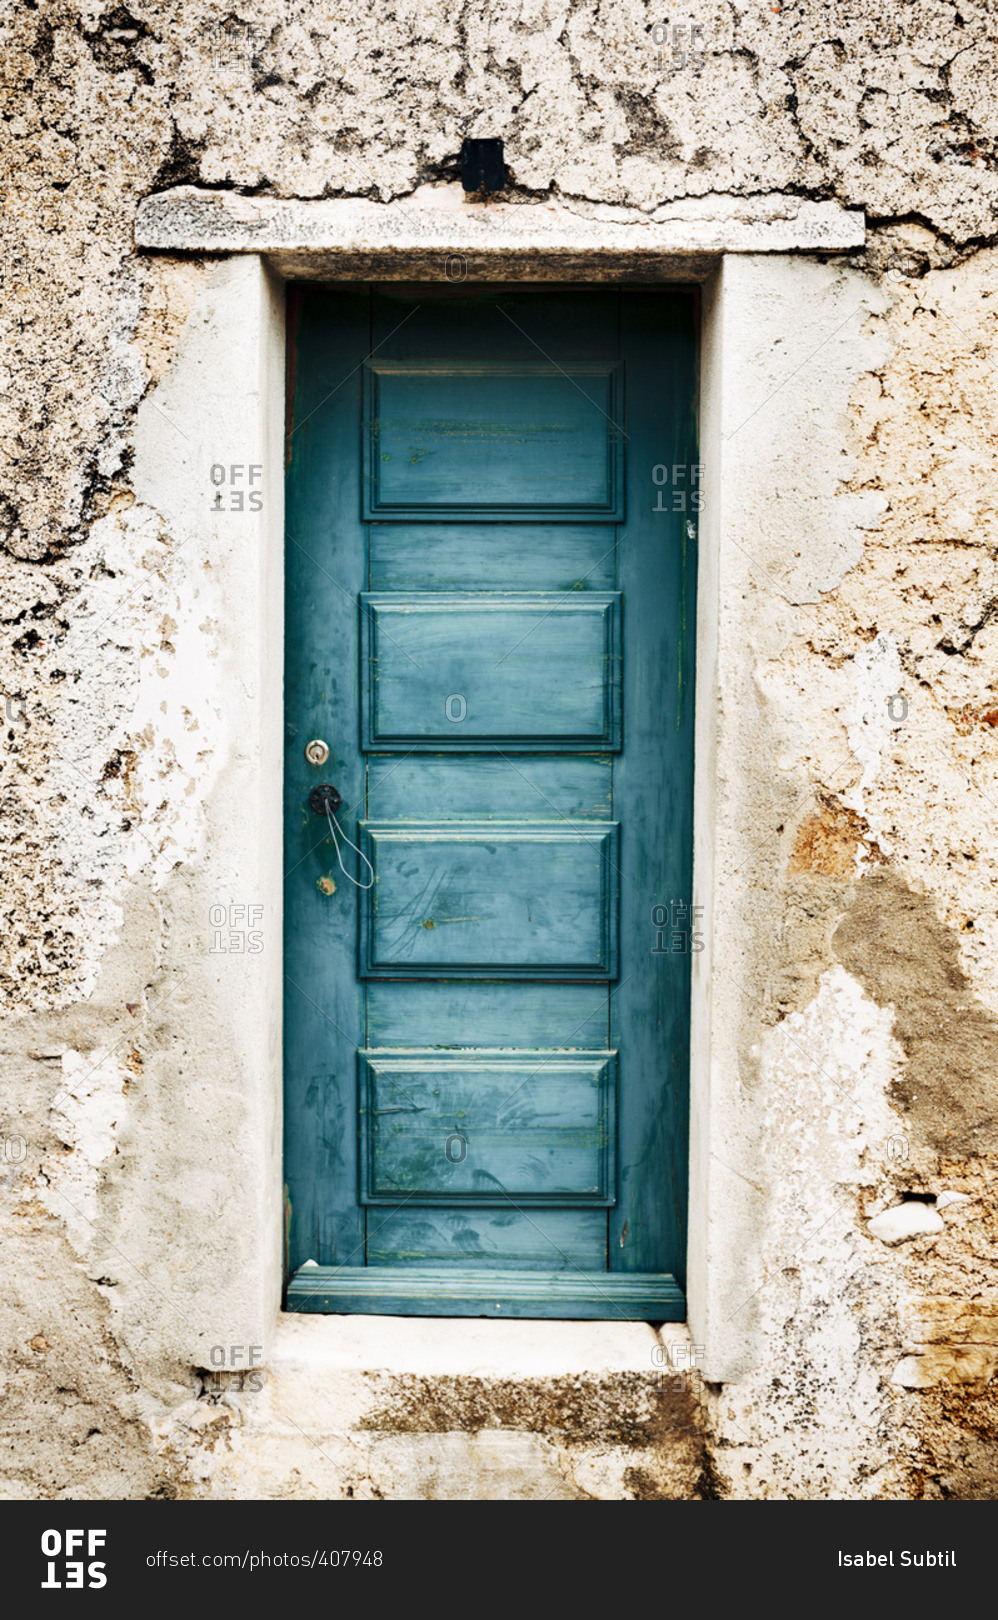 A weathered door in Portugal